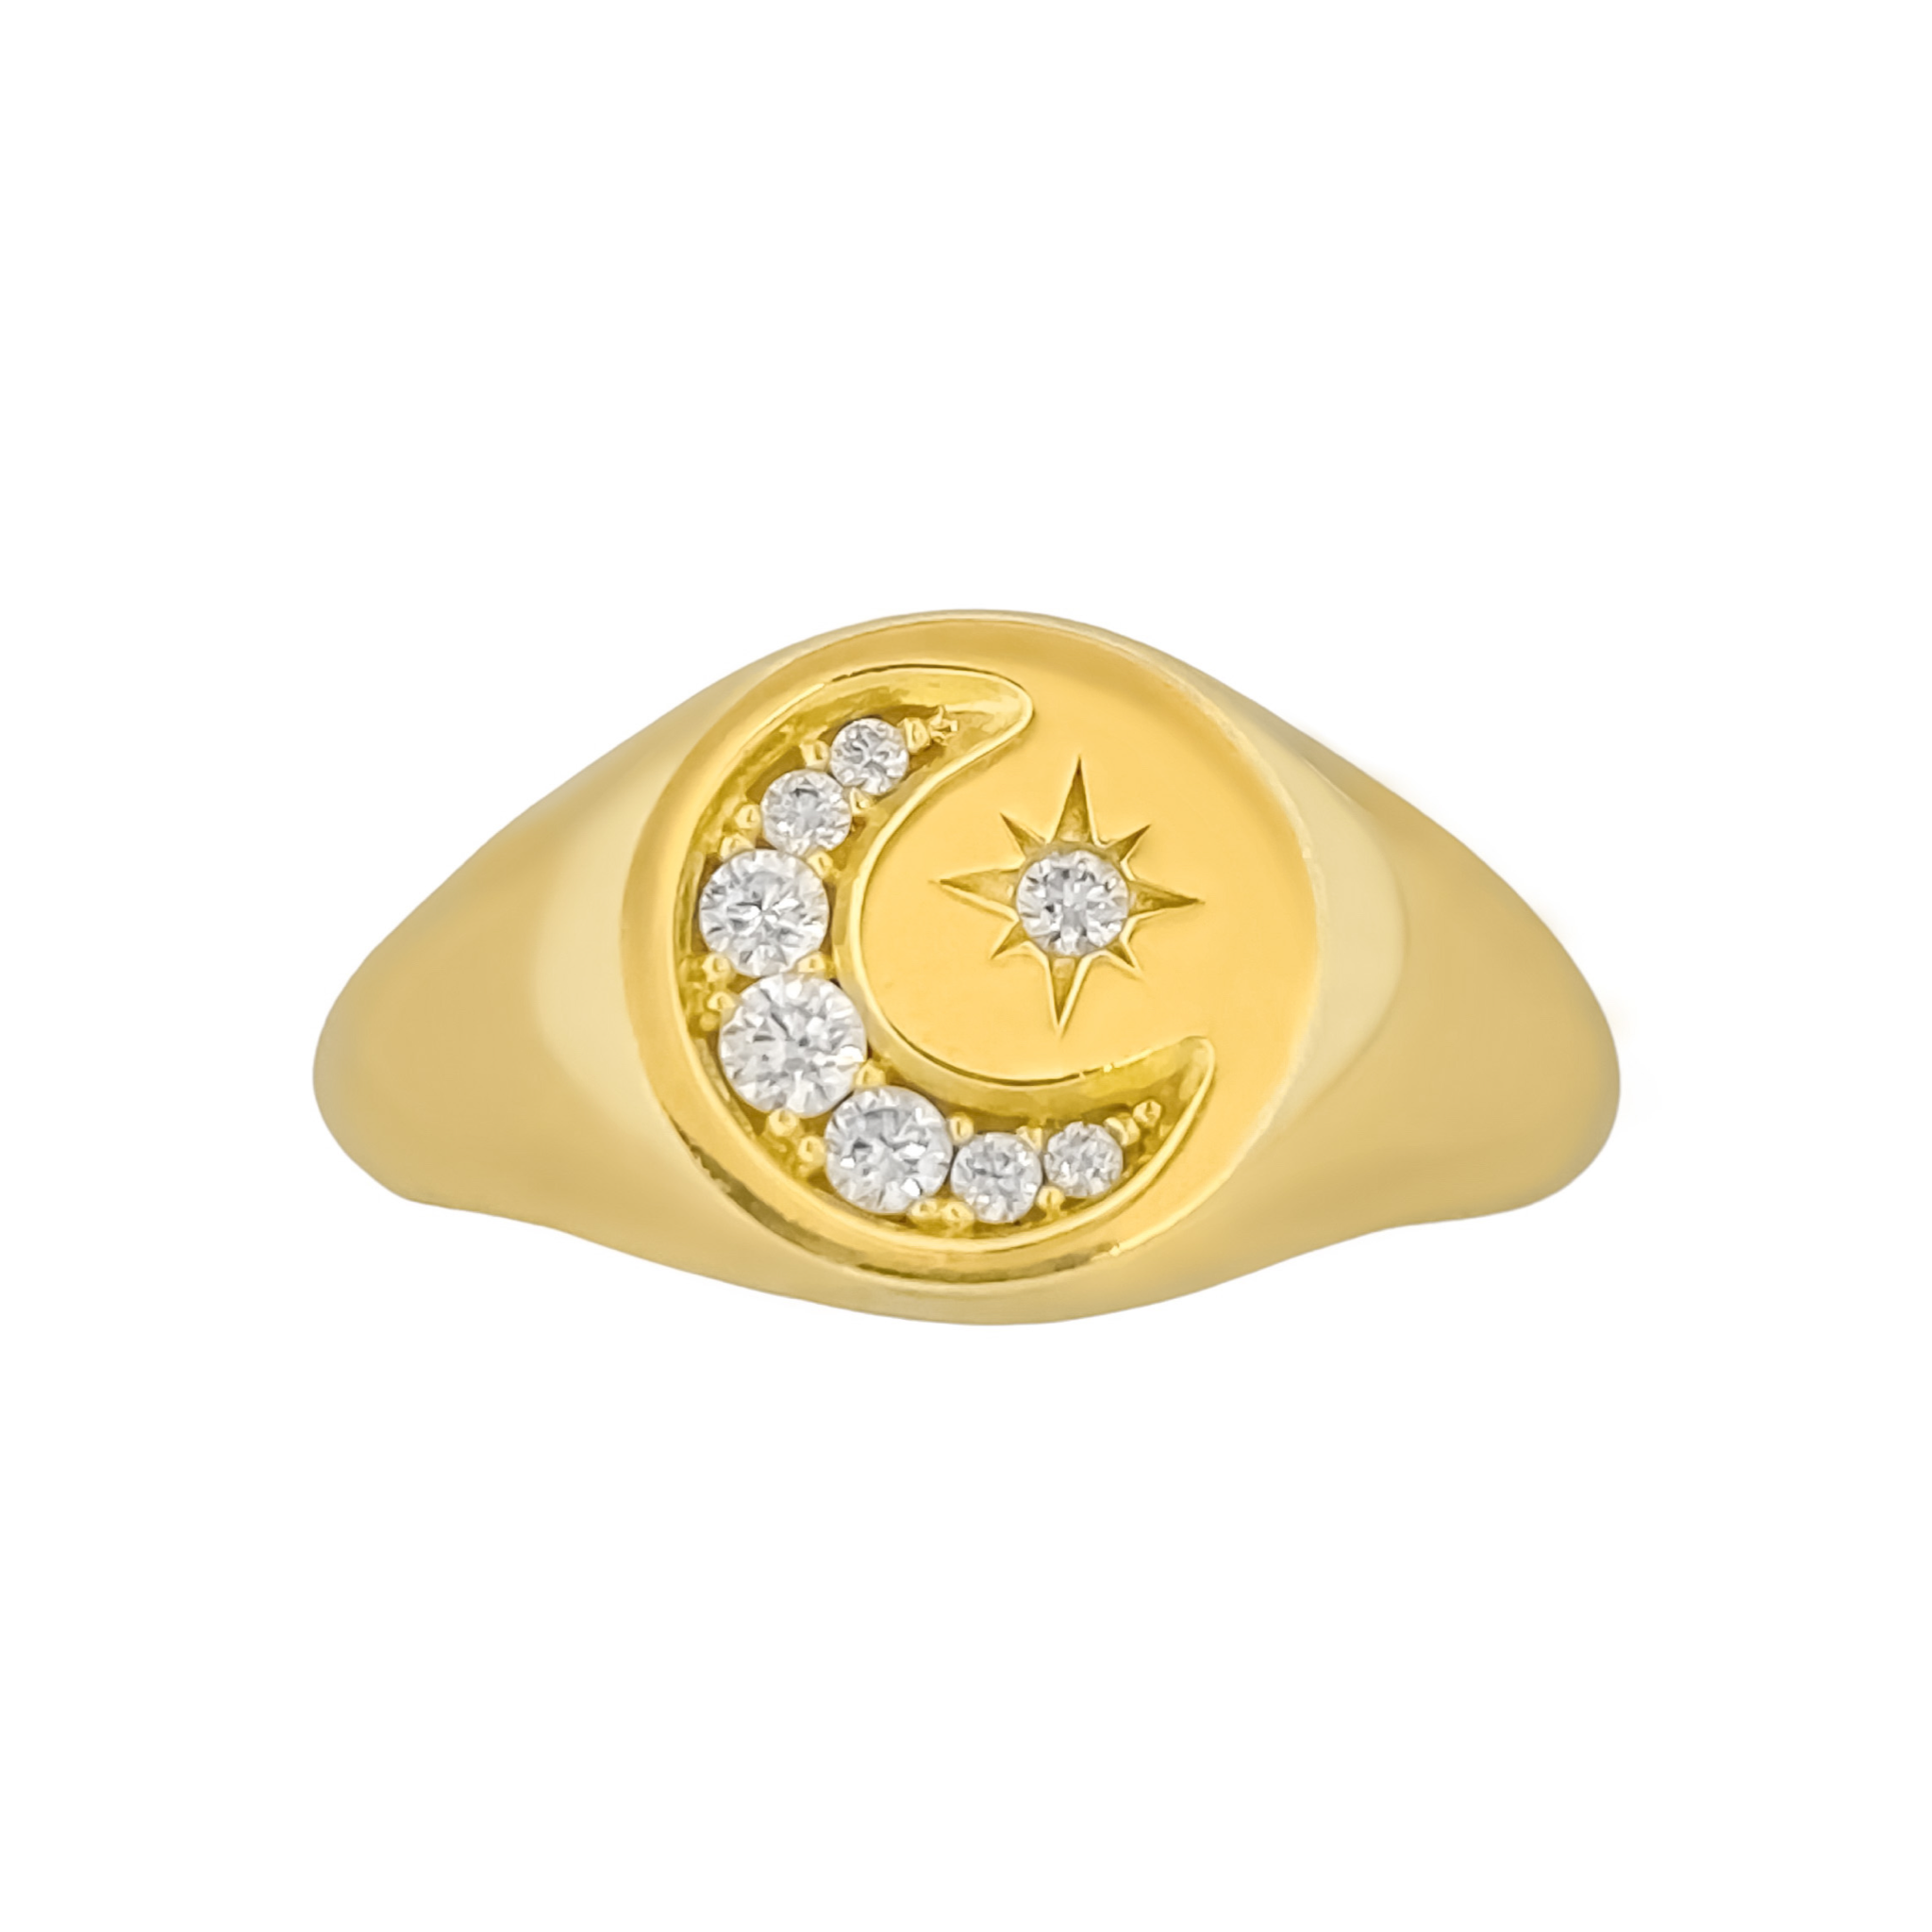 14K YELLOW GOLD PAVE MOON OVAL SIGNET RING